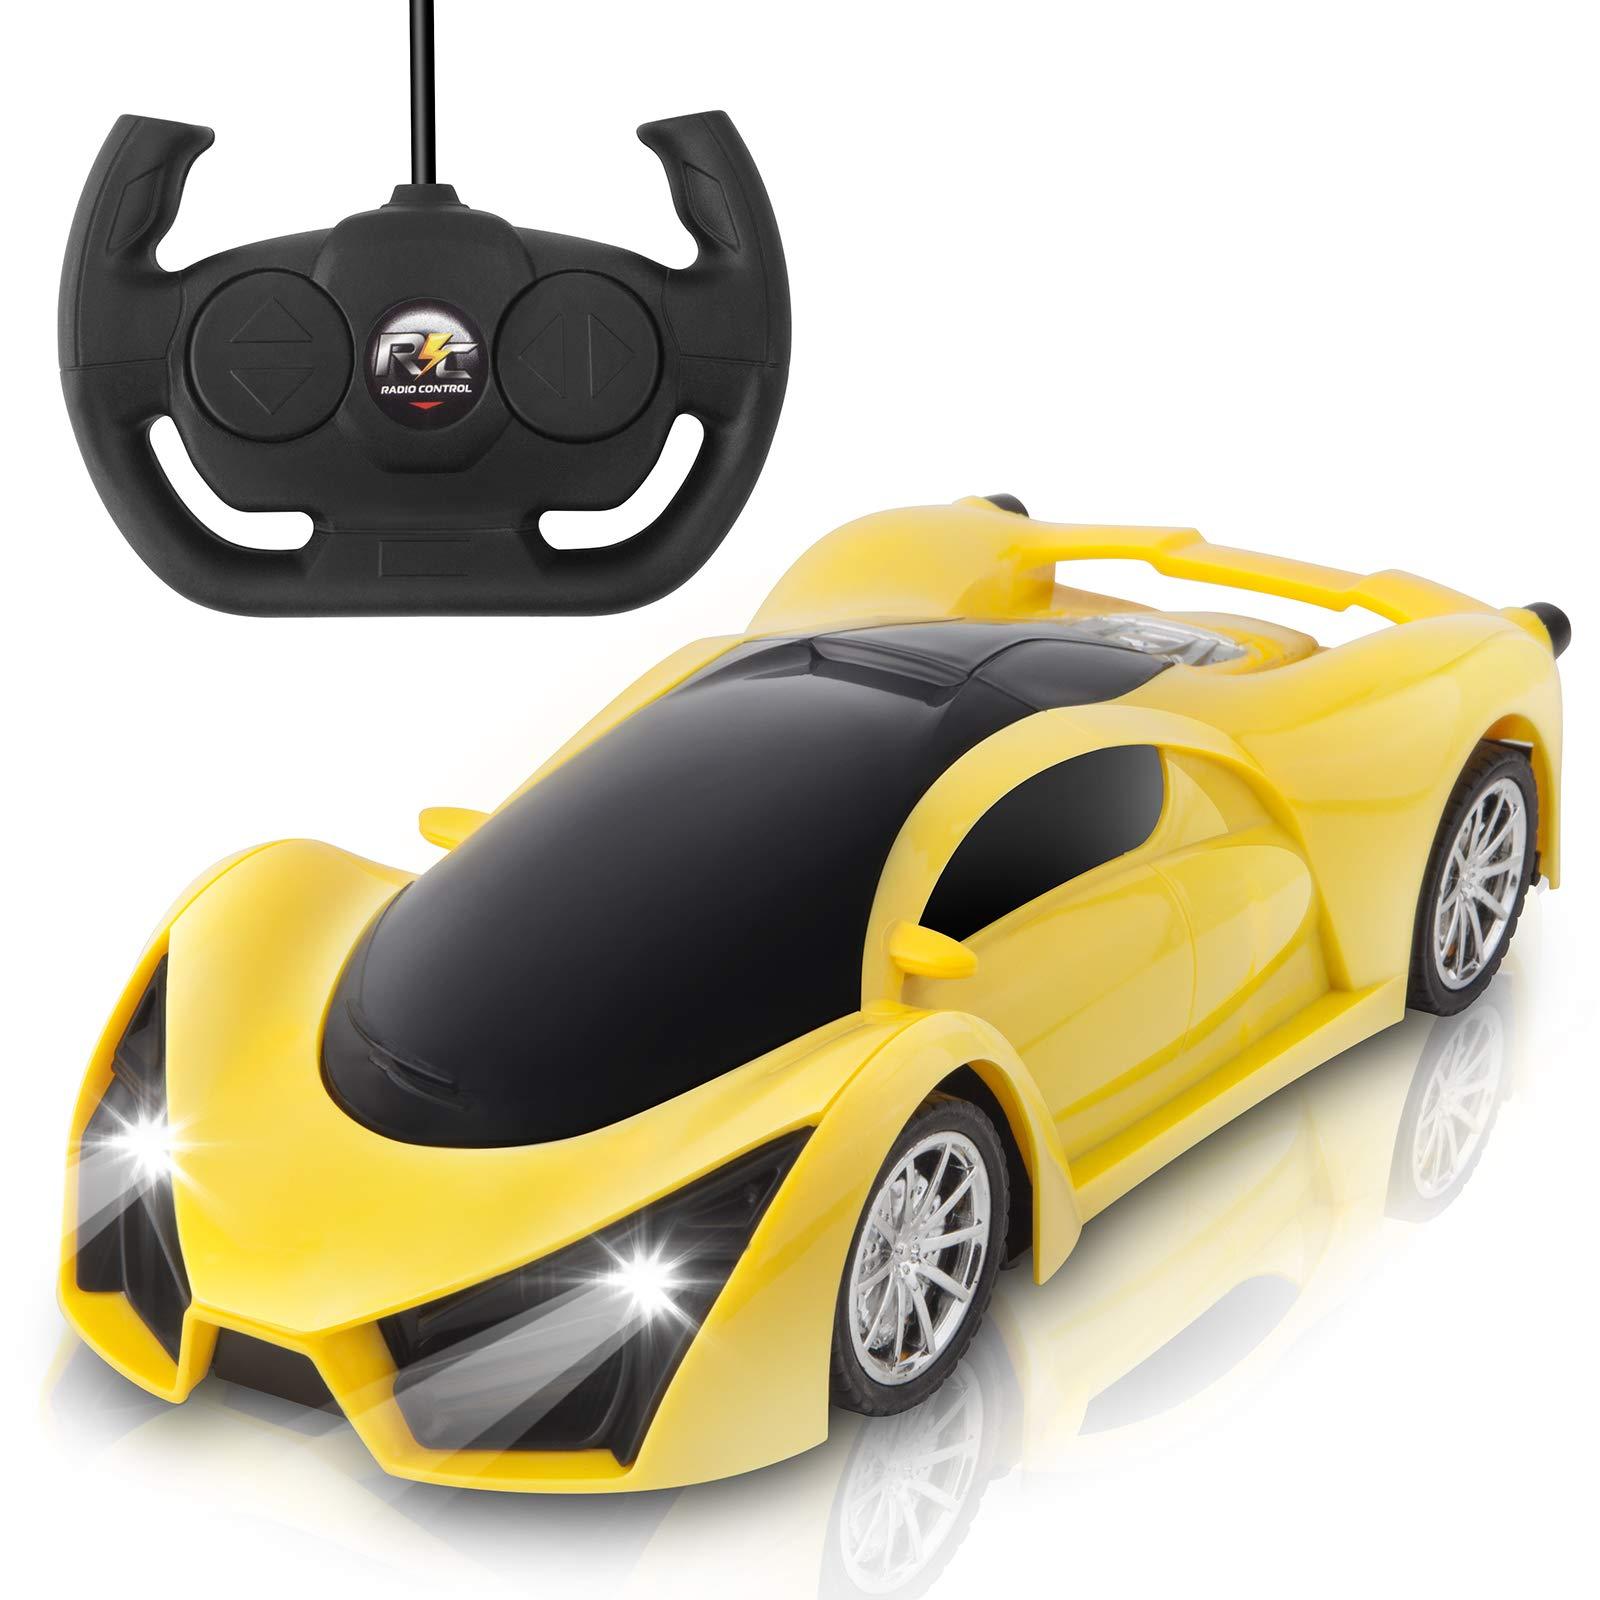 1/16 Rc Car: Popular 1/16 RC Car Models and Where to Find Them